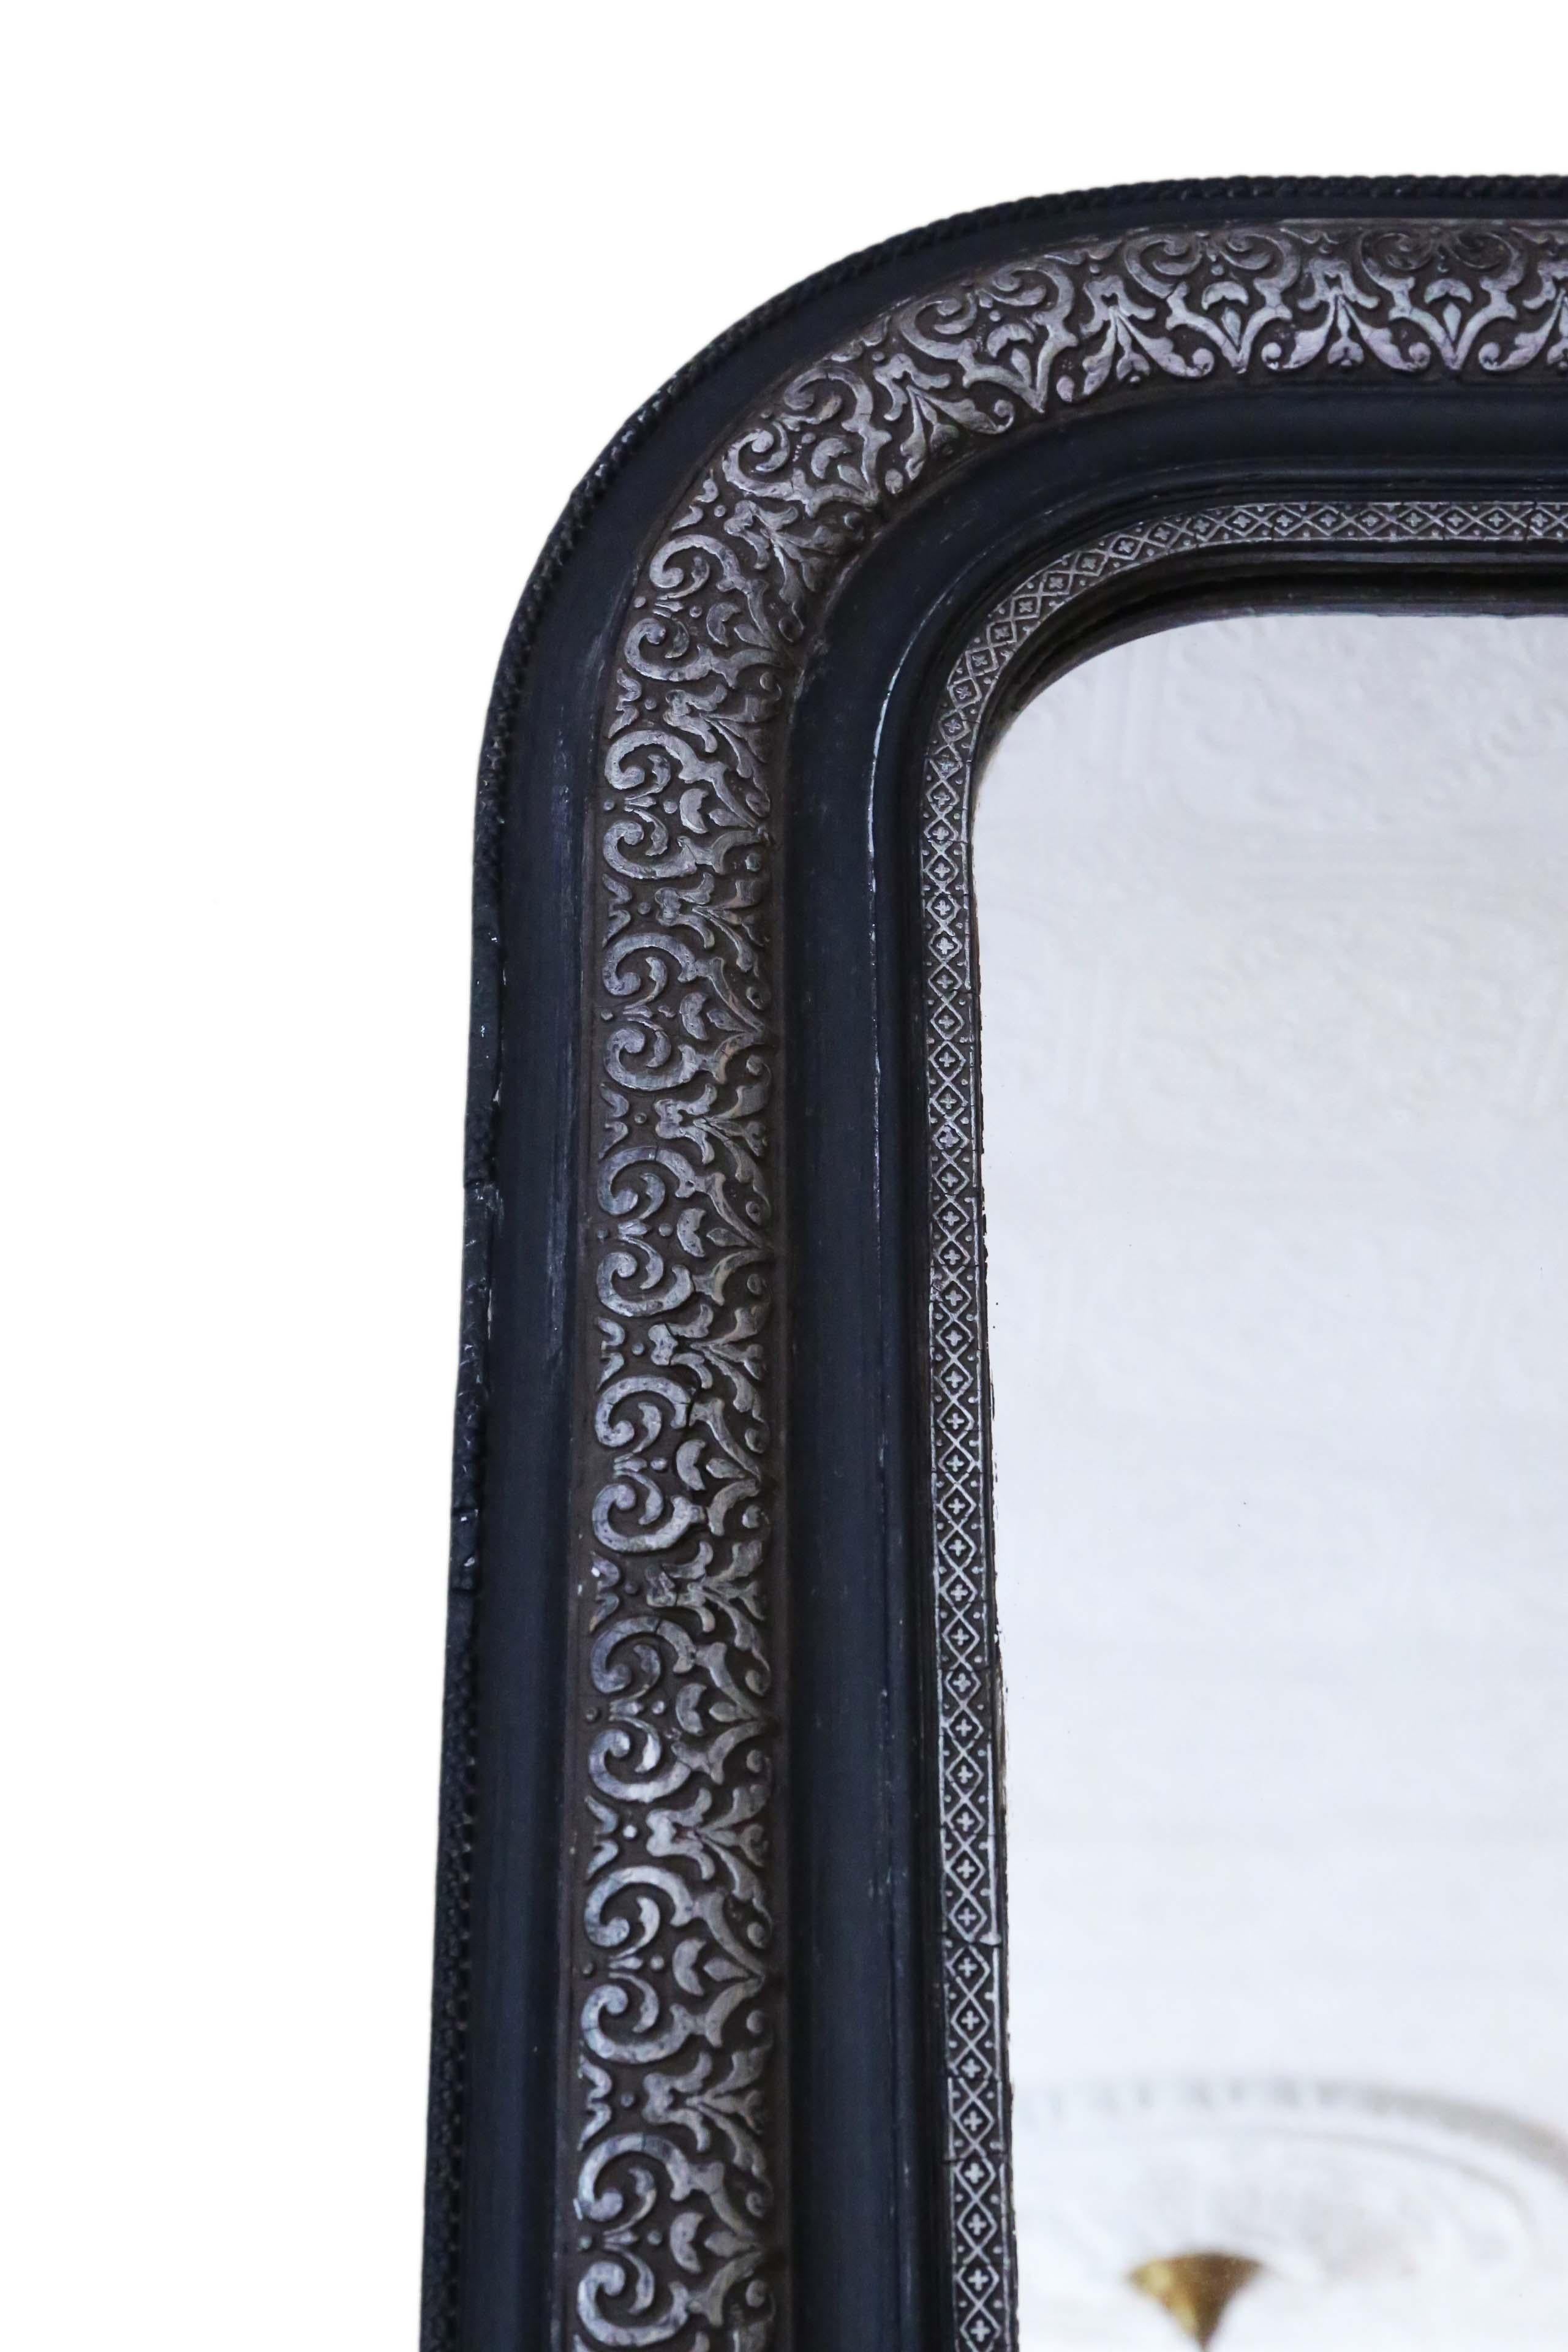 Antique large fine quality ebonised / silver gilt wall mirror or overmantle late 19th Century, C1895. Lovely charm and elegance.

An impressive rare find, that would look amazing in the right location. No loose joints.

The original mirrored